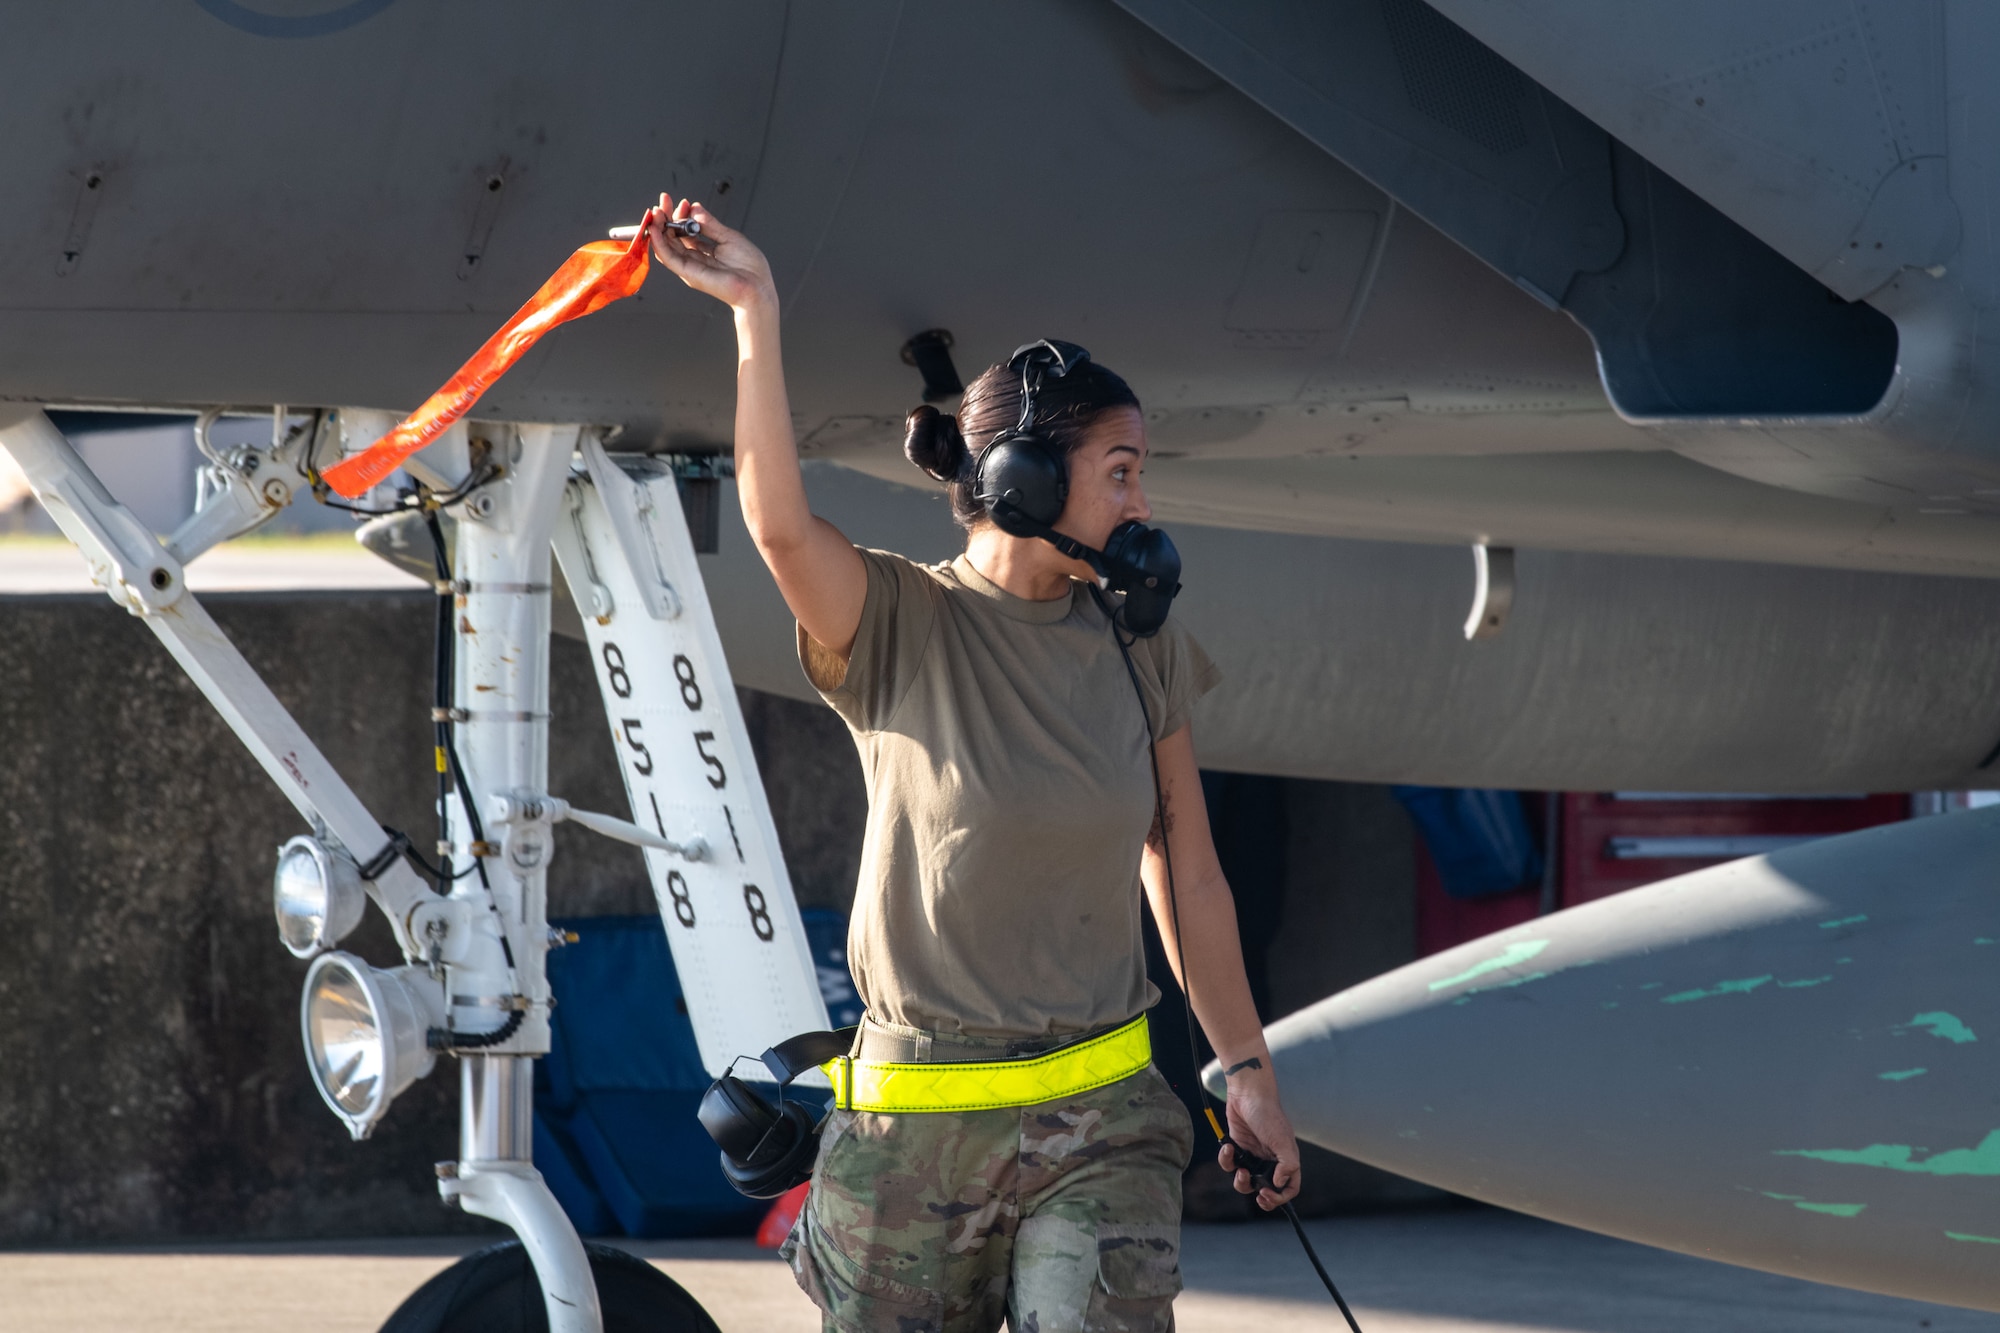 U.S. Air Force Senior Airman Avi Reed, crew chief, 125th Aircraft Maintenance Squadron, prepares an F-15C Eagle jet for takeoff at the Jacksonville Air National Guard Base, Florida, Aug. 14, 2023.  The aircraft was flown to the “boneyard” at Davis-Monthan Air Force Base in Tucson, Arizona, representing the wing’s divesture in the F-15C Eagle airframe. The installation will receive the first batch of F-35 Lightning II aircraft in early 2025. Conversion training for Airmen and infrastructure changes are currently underway to prepare for the change in mission, which will equip the wing with the Air Force’s most sophisticated fifth-generation fighter. The arrival of F-35s will posture 125th FW Airmen to meet air superiority and global strike needs for our nation’s defense, and mark the end of a 30-year era flying F-15 fighter jets. (U.S. Air Force photo by Tech Sgt. Chelsea Smith)